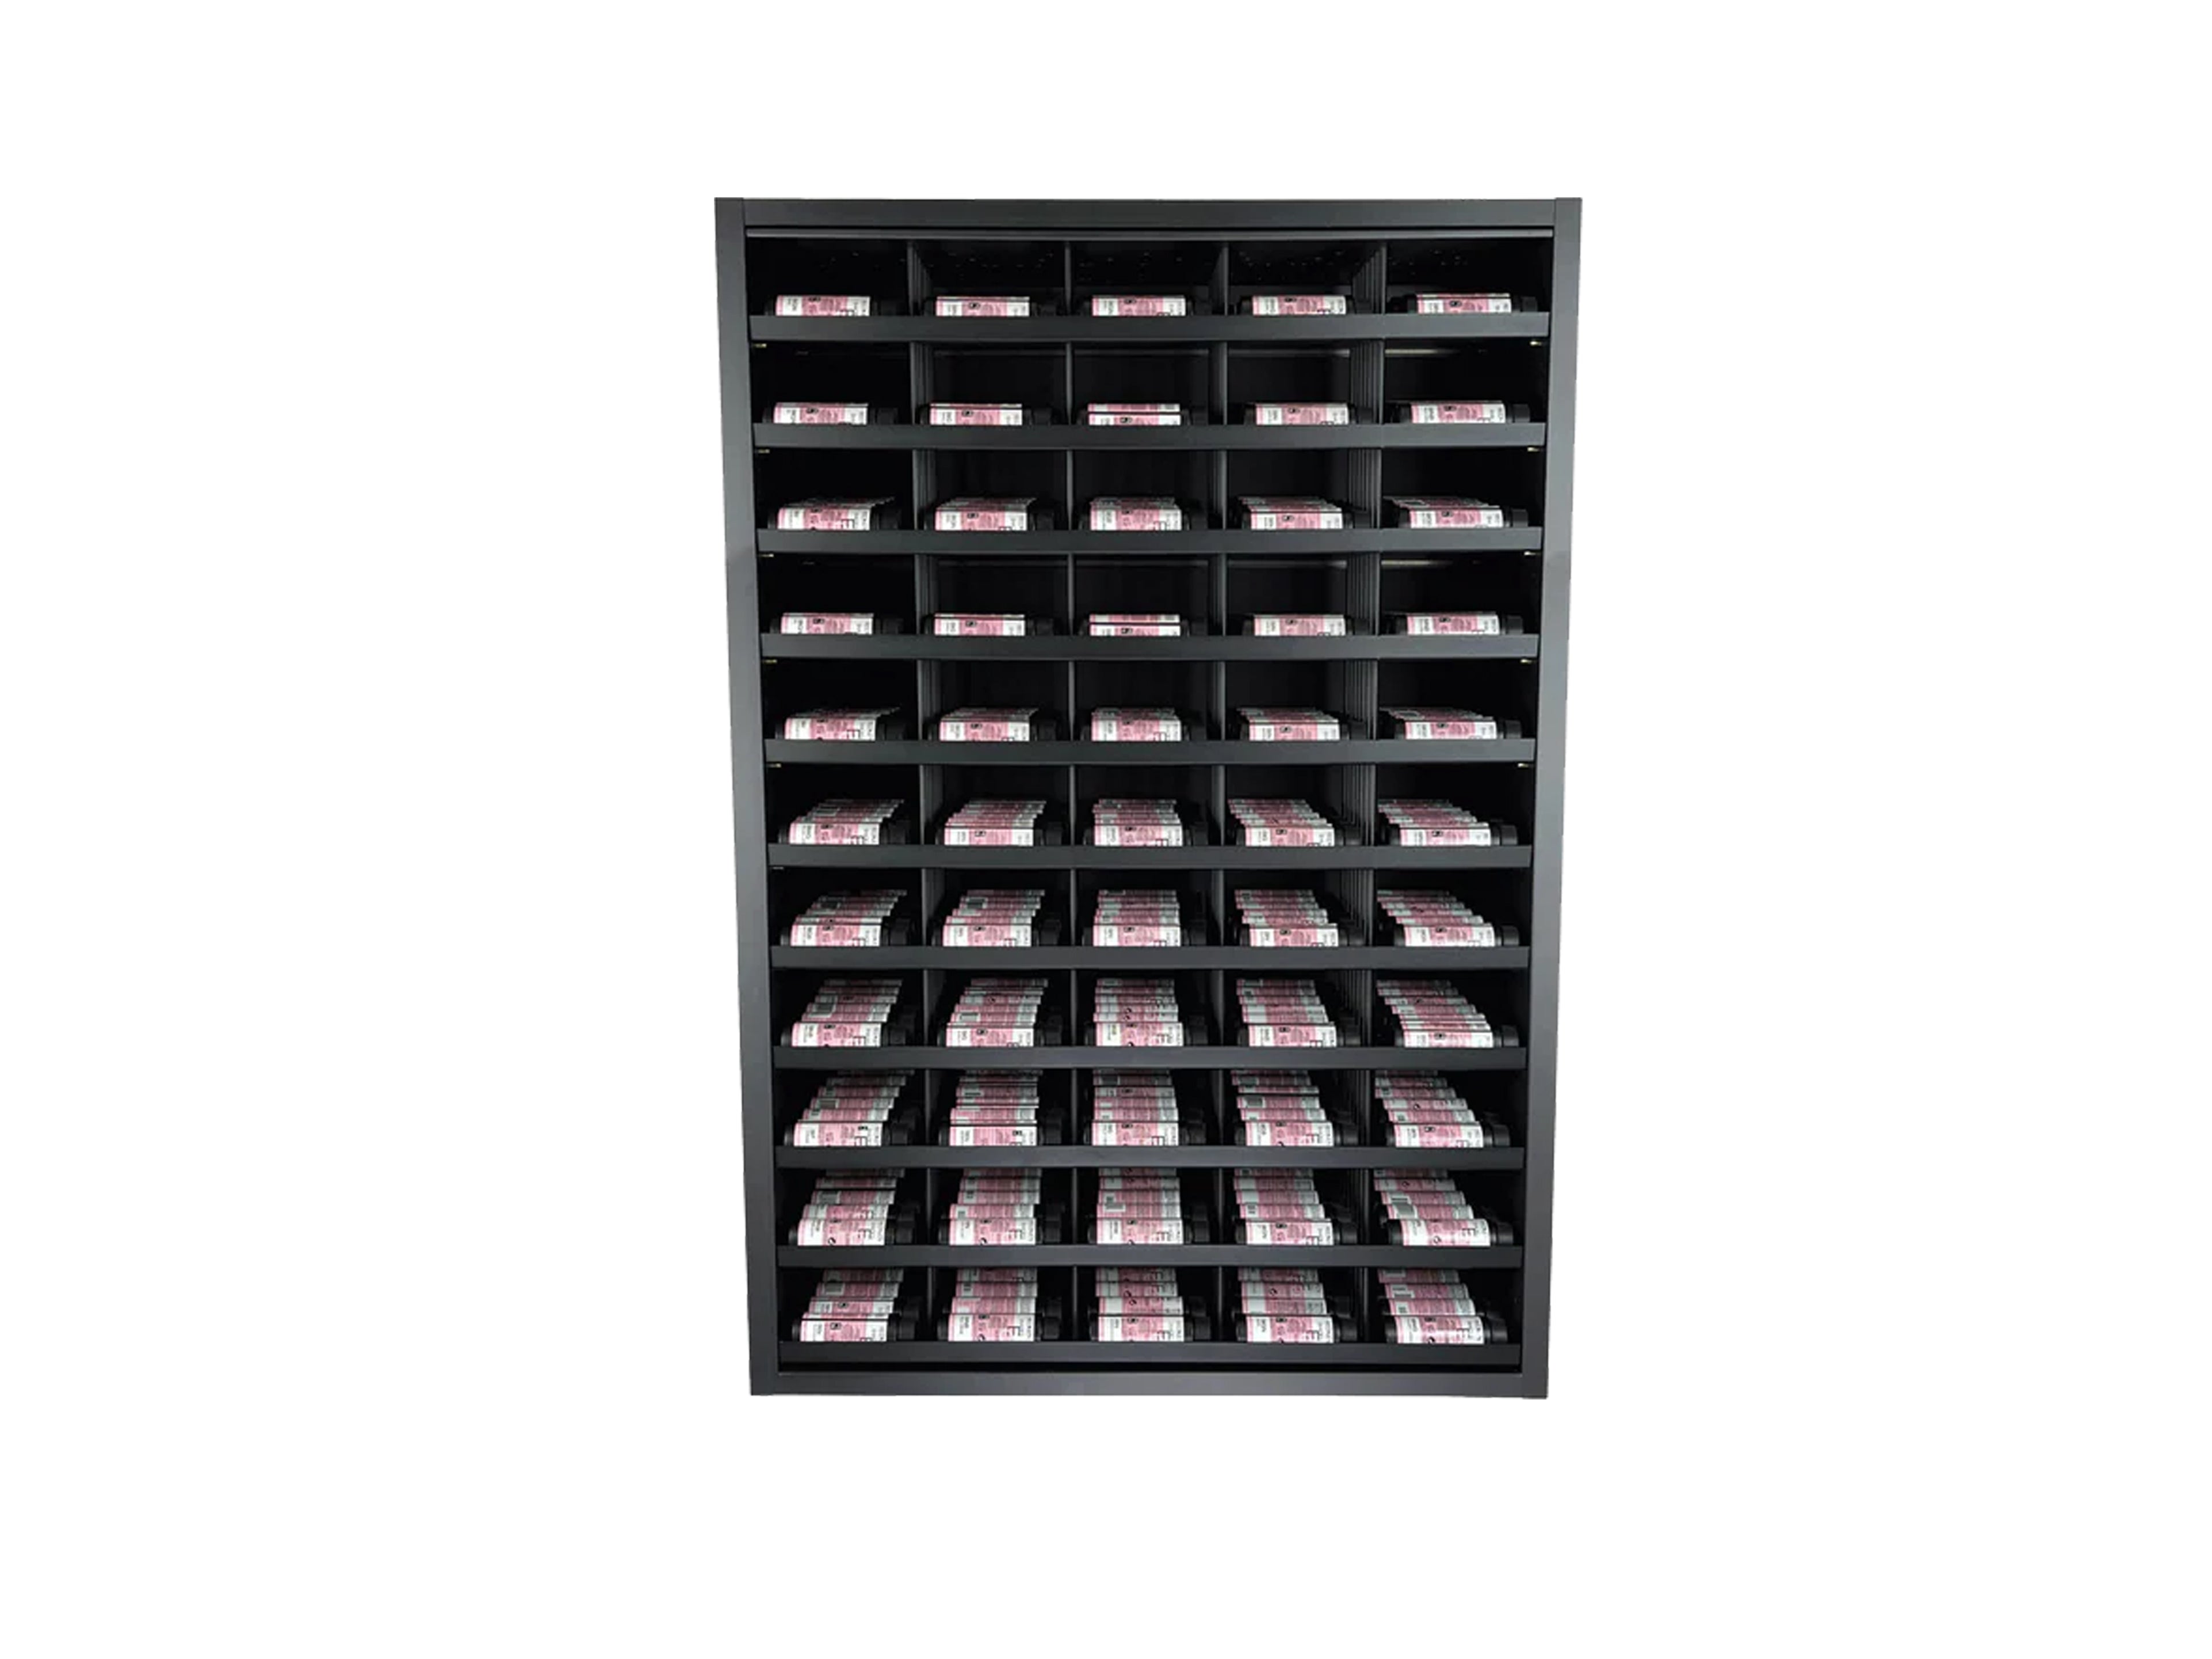 Shades EQ hair color organizer. Matee black color storage rack for hair salons.